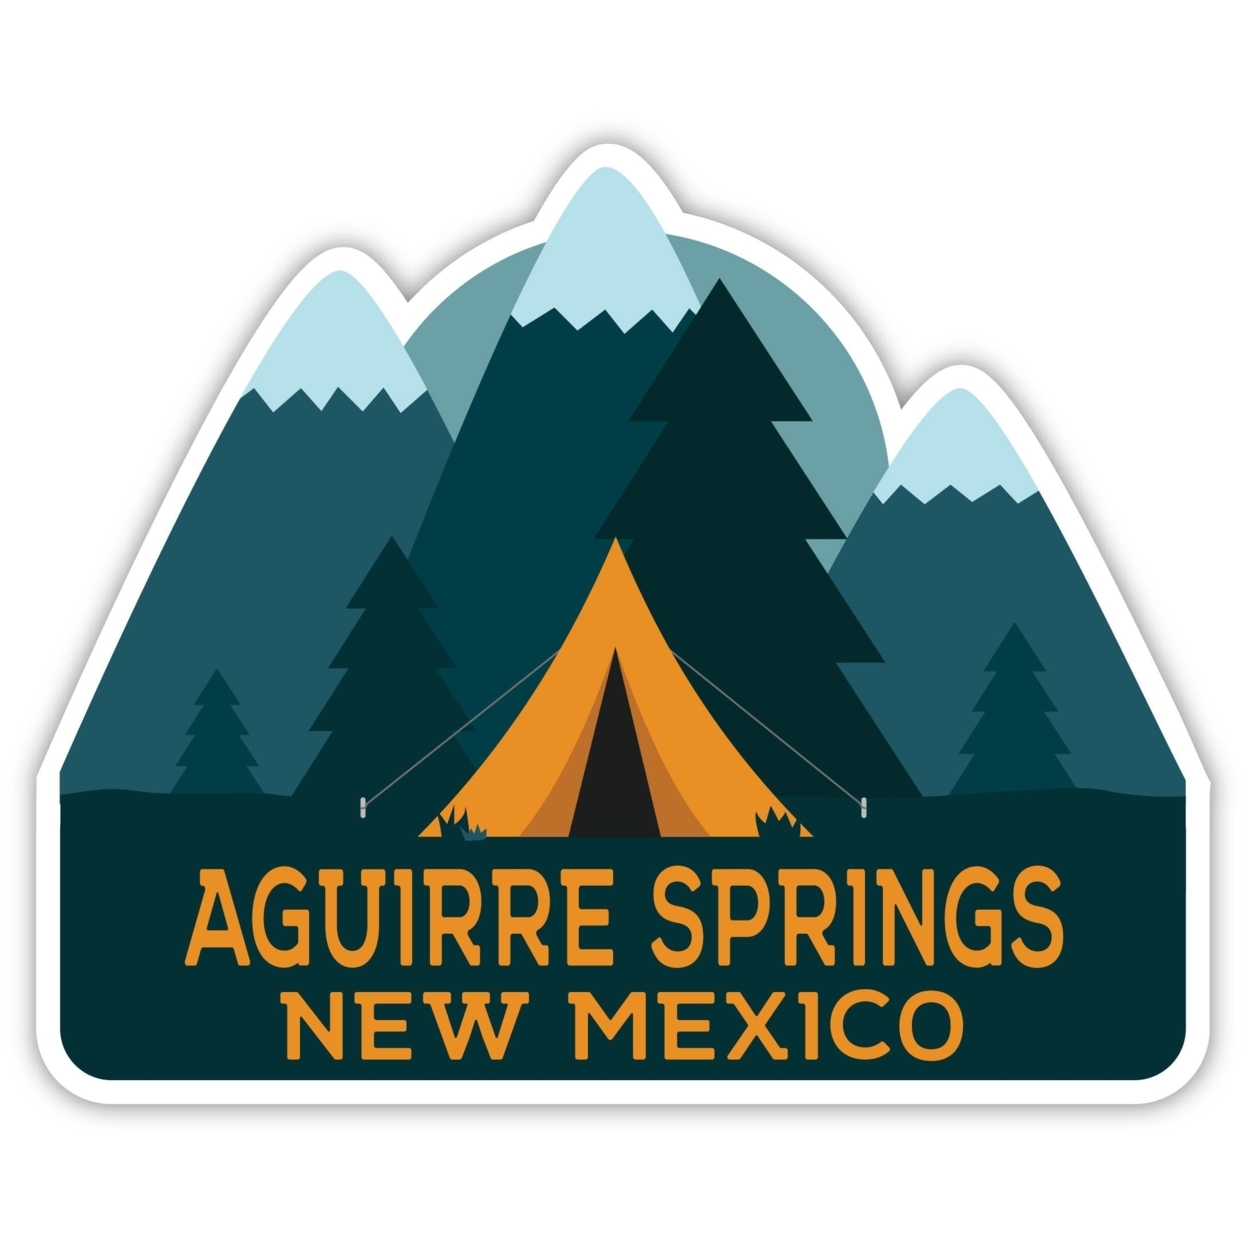 Aguirre Springs New Mexico Souvenir Decorative Stickers (Choose Theme And Size) - Single Unit, 8-Inch, Tent